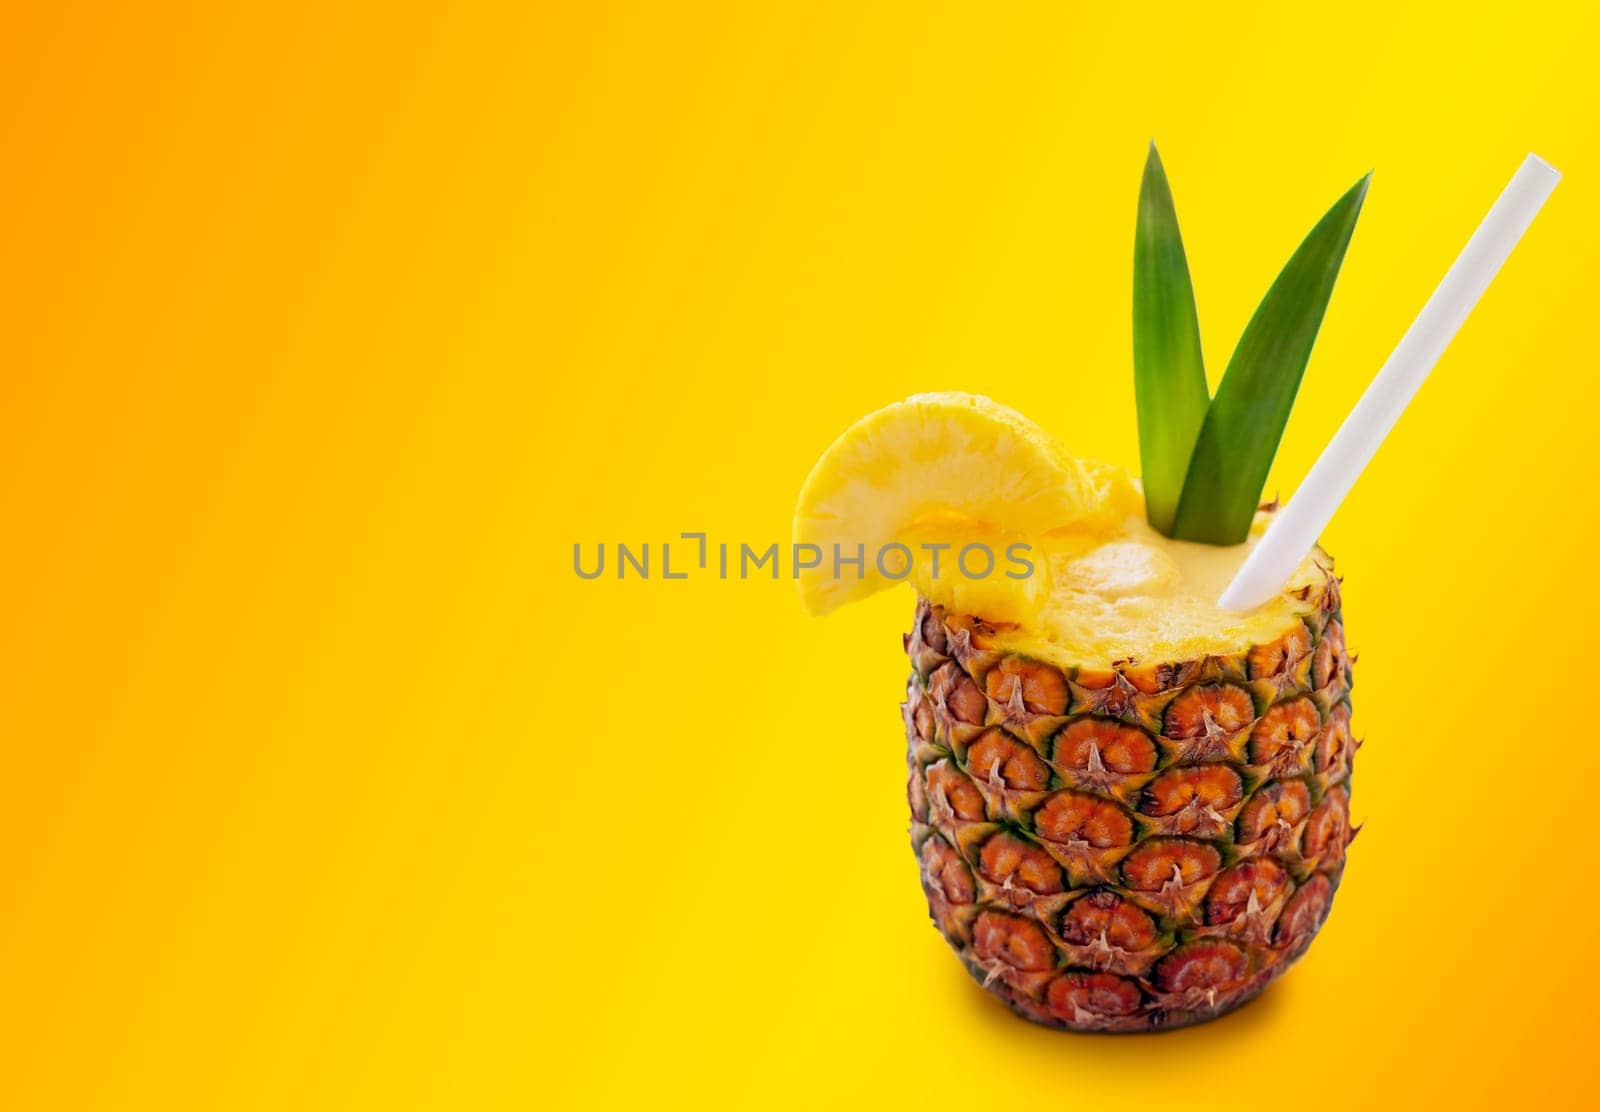 Pina colada cocktail in pineapple with straw, pineapple slices, and two green leaves on the orange background